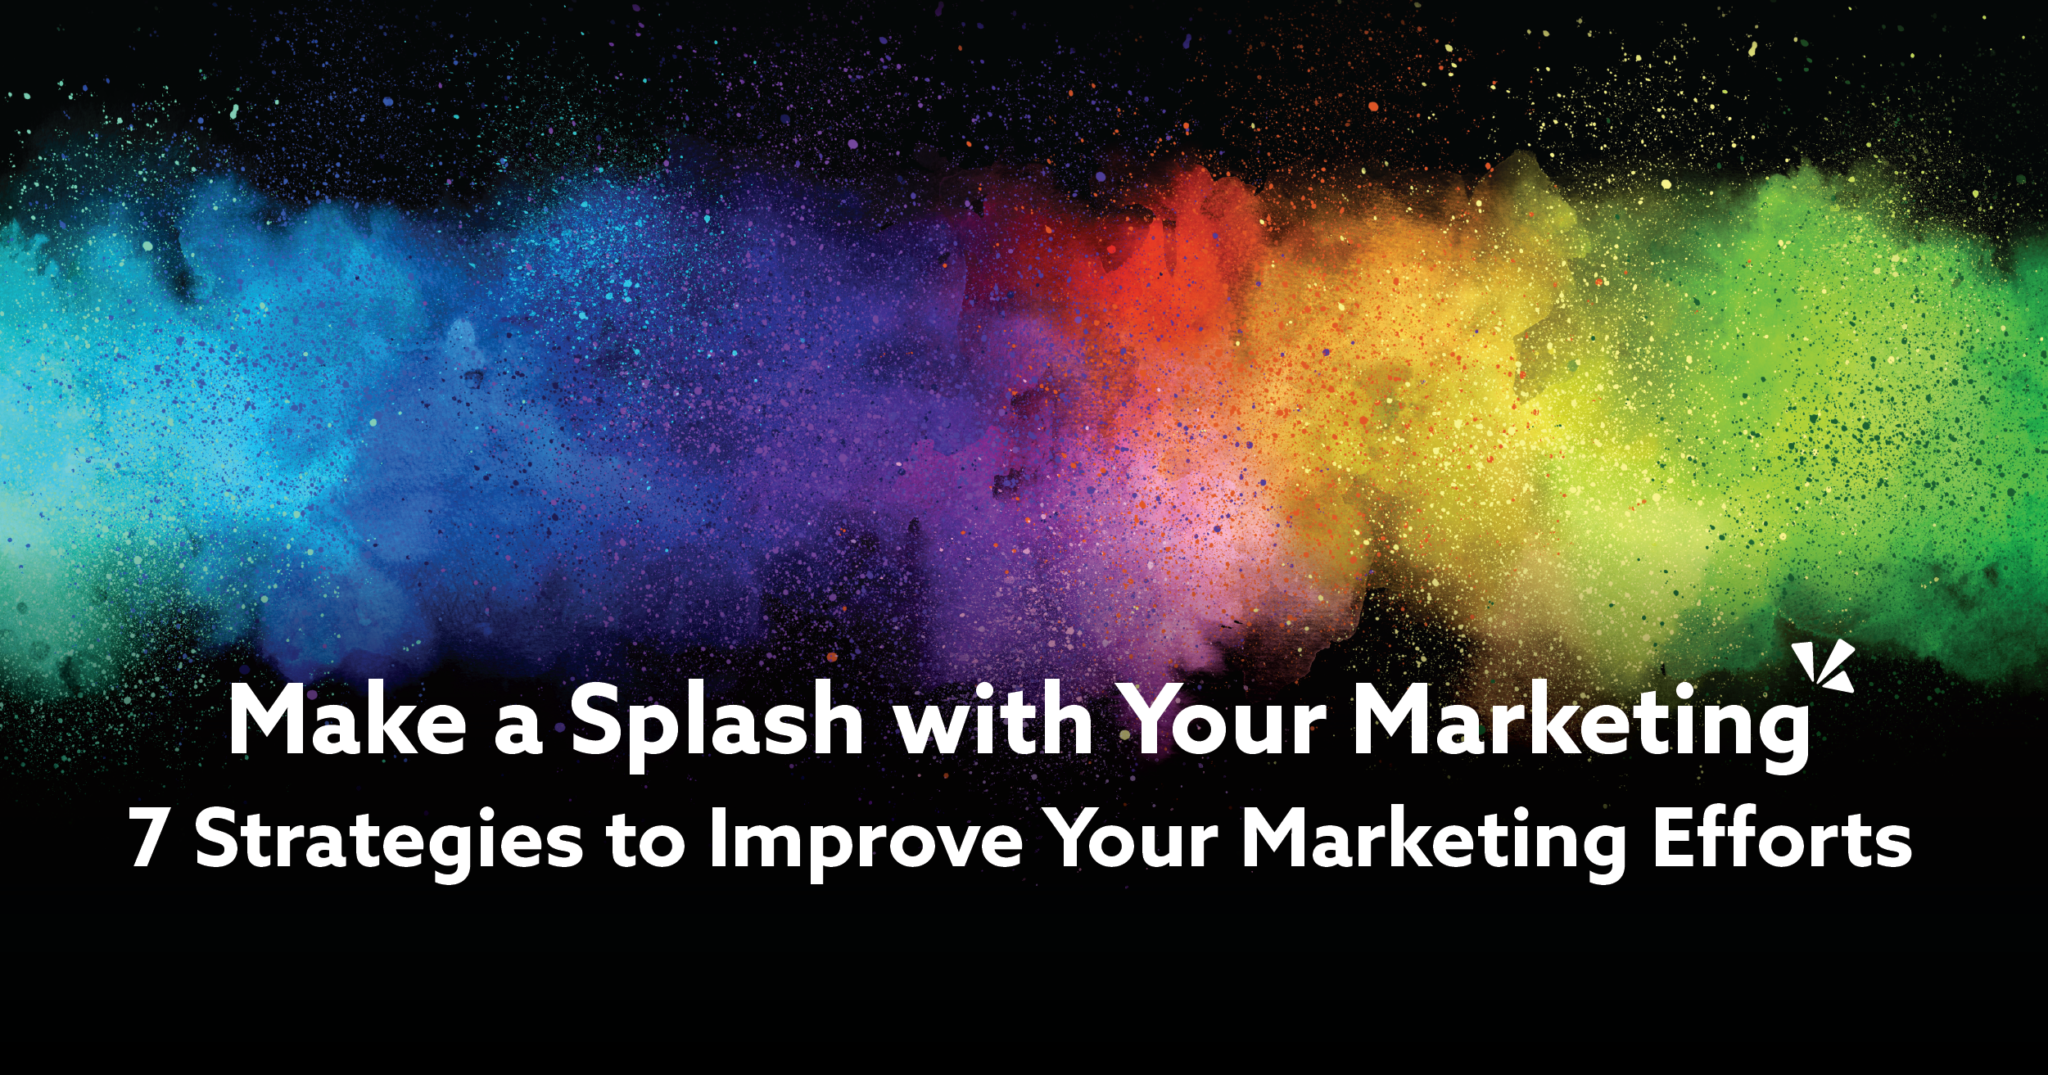 Colorful powered splashes on a black background with the text "Make a Splash with Your Marketing: 7 Strategies to Improve Your Marketing Efforts" overlaid